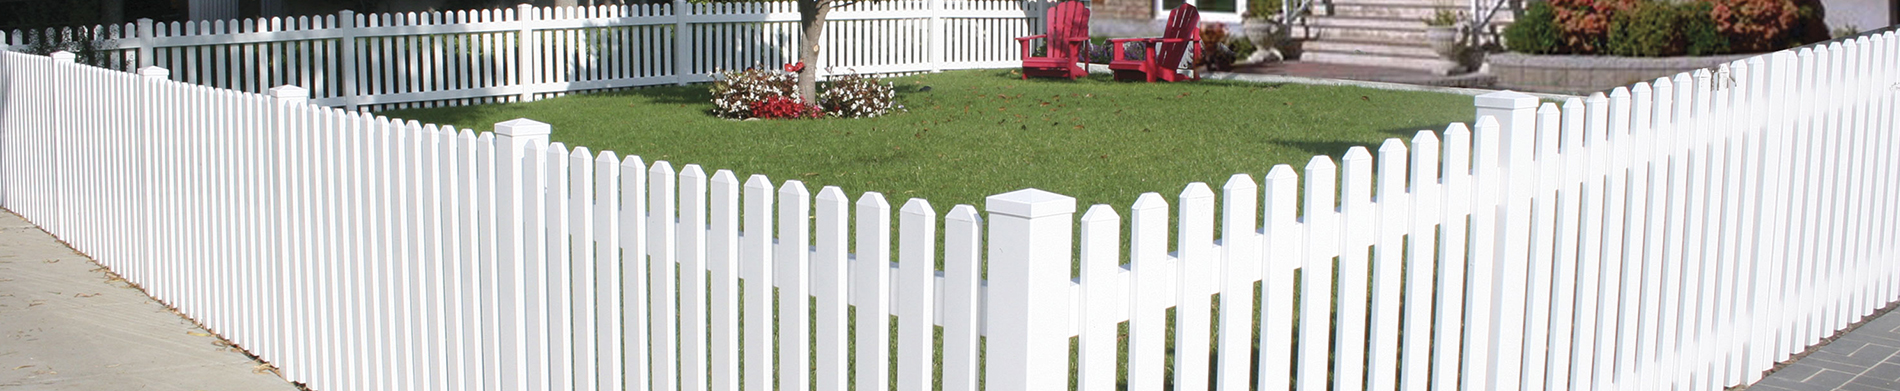 Do’s and Don’ts of Installing a Vinyl Fence in Your Property